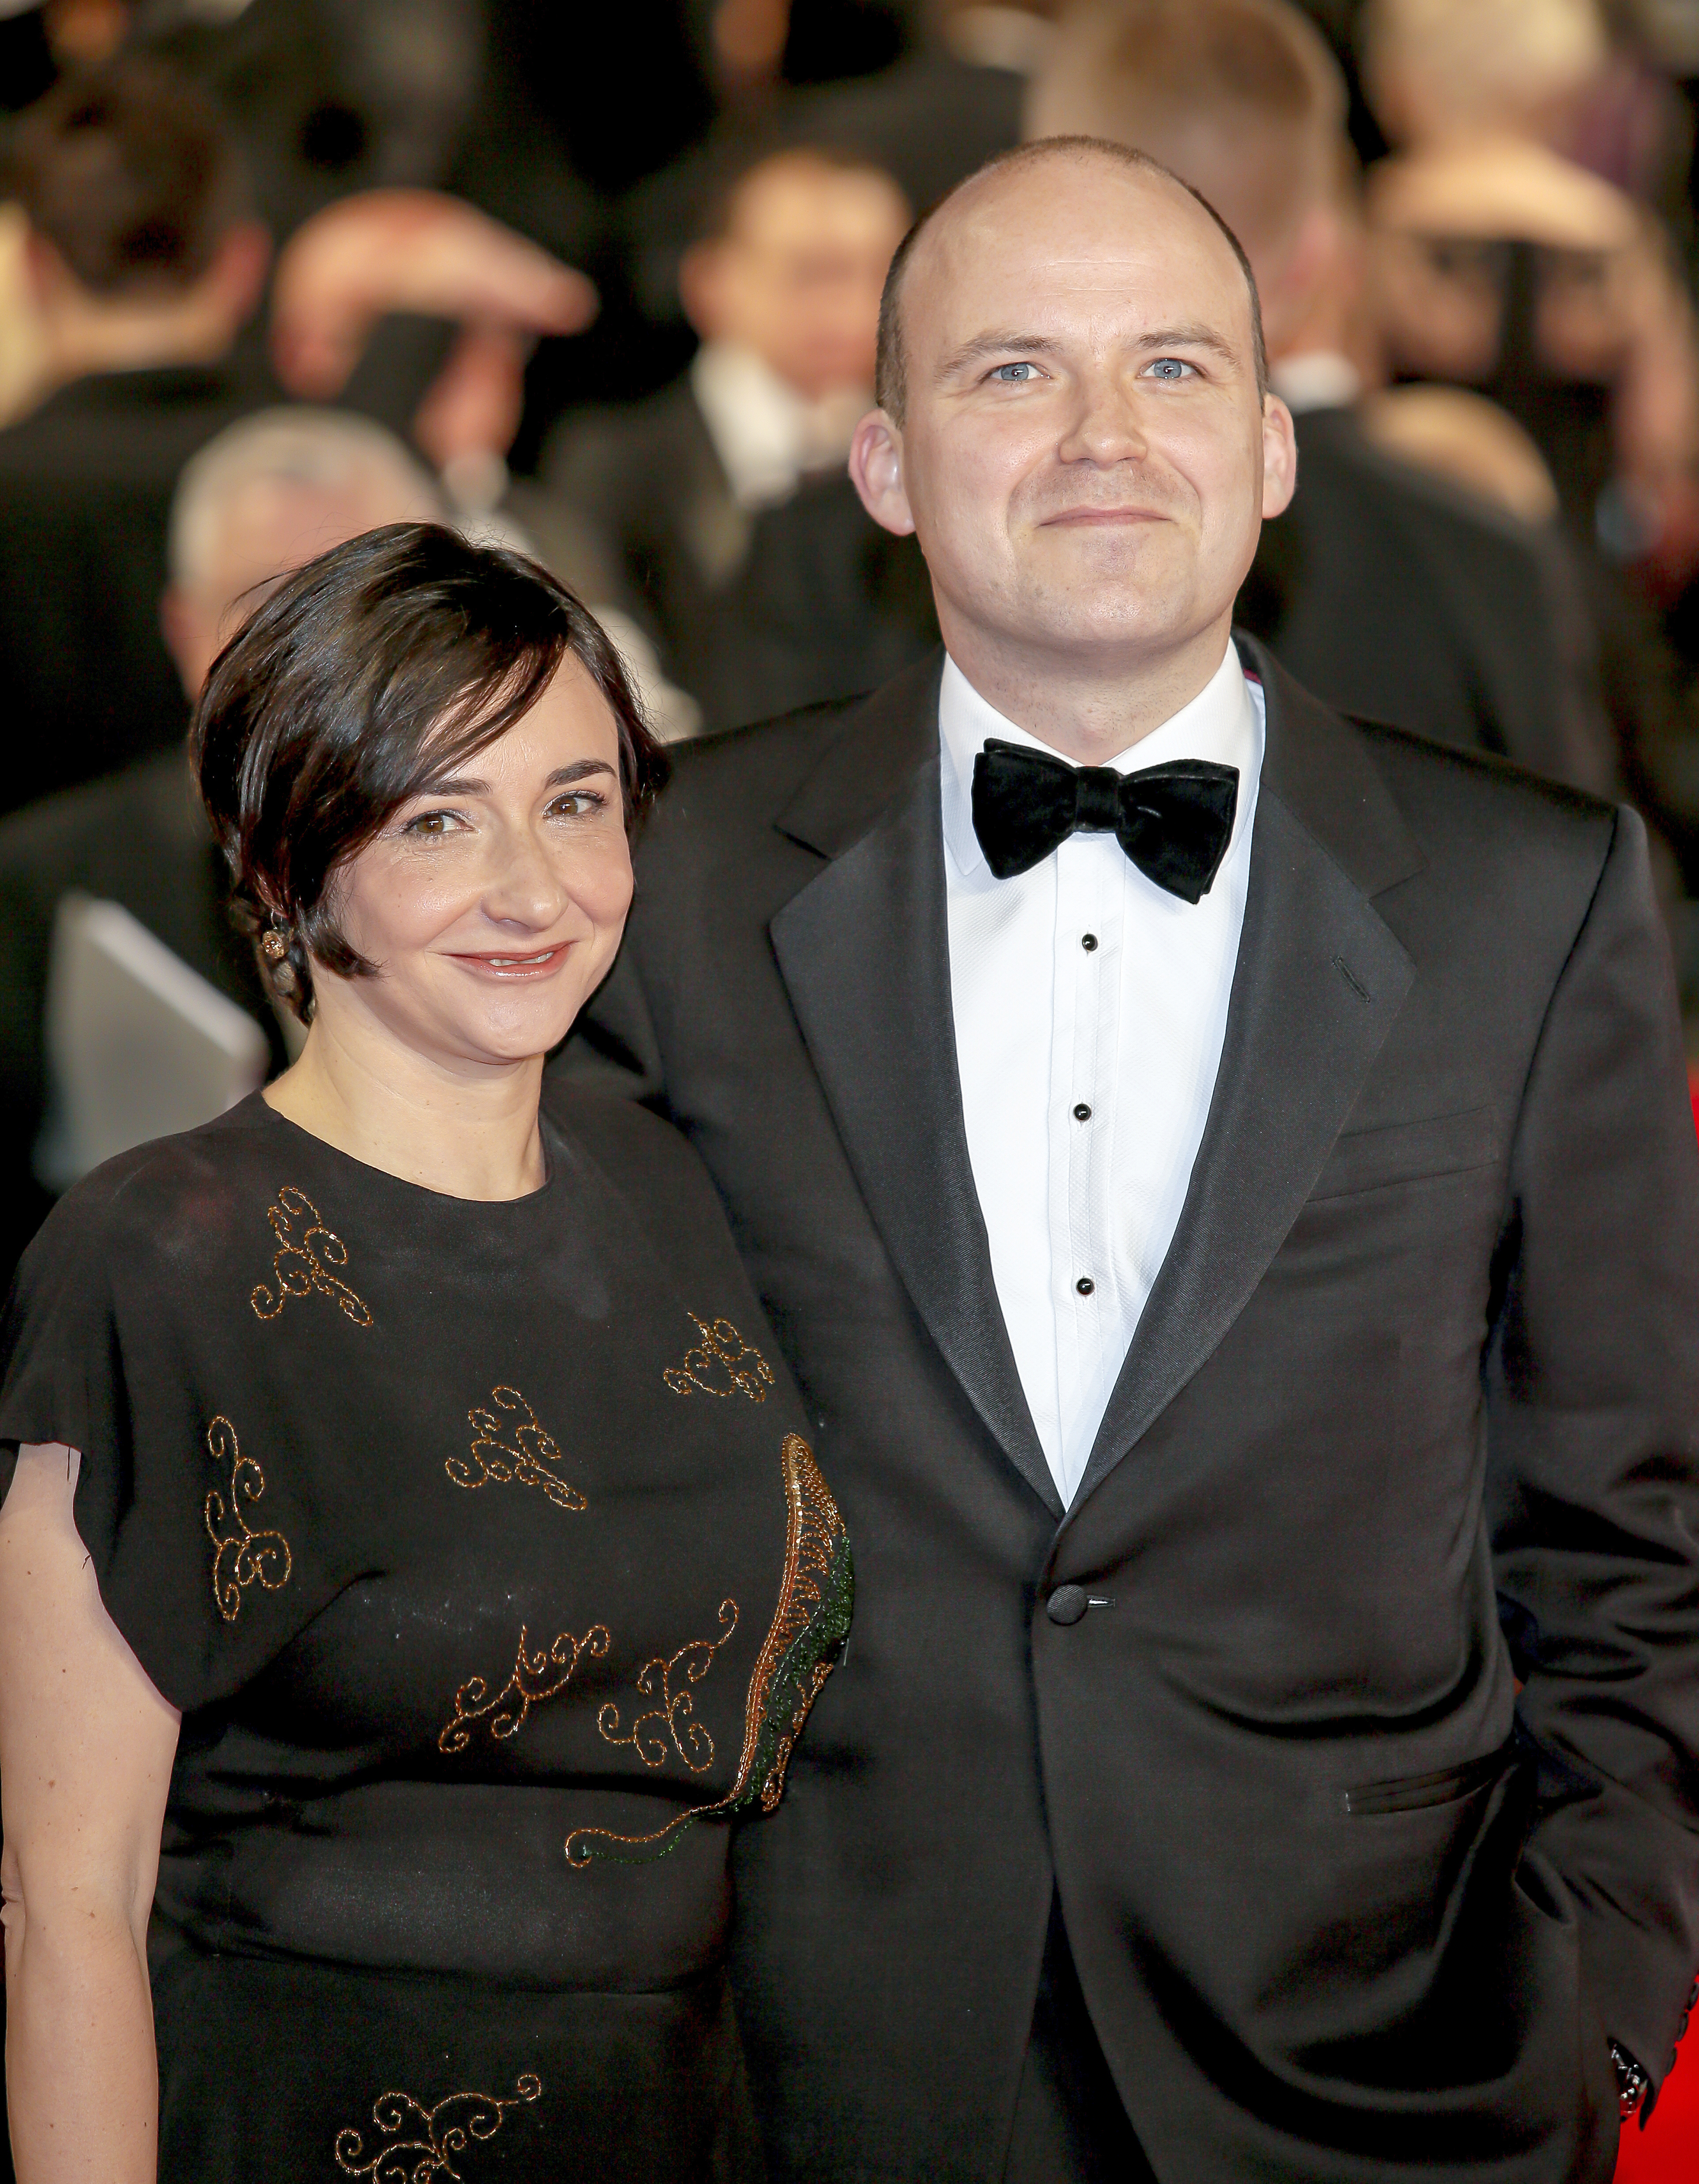 Actress Pandora Colin and her partner Rory Kinnear attend the "Spectre" premiere on October 26, 2015 in London, United Kingdom | Source: Getty Images